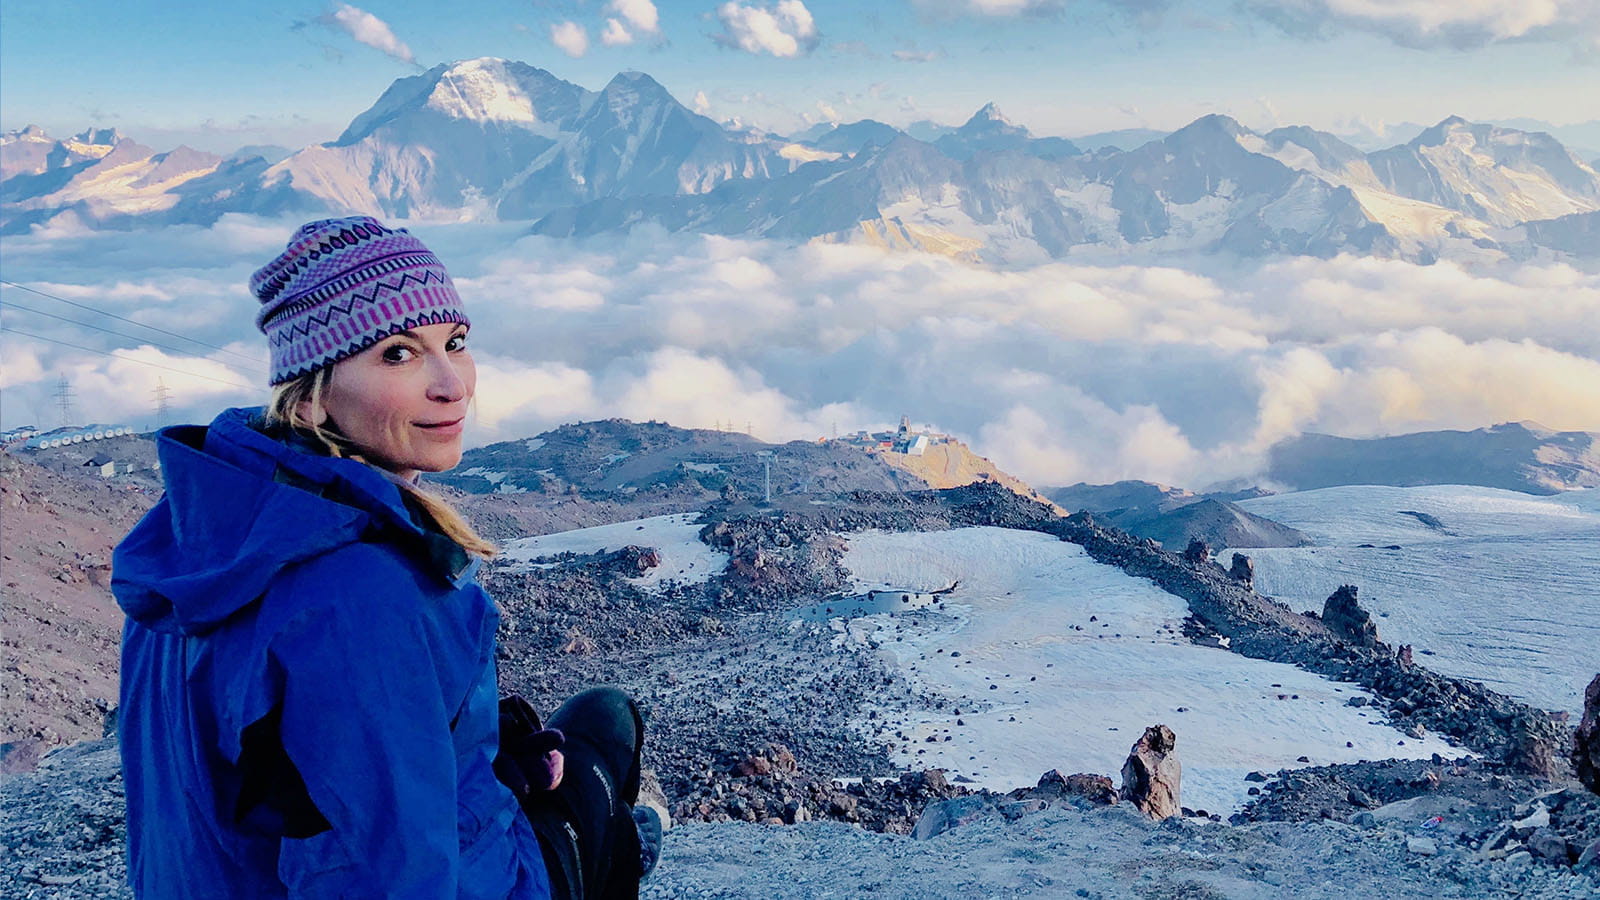 Buchanan takes in the view above the clouds of the 18,510-foot Mount Elbrus, Russia, as she prepares for a 2 a.m. summit day start in August 2018.